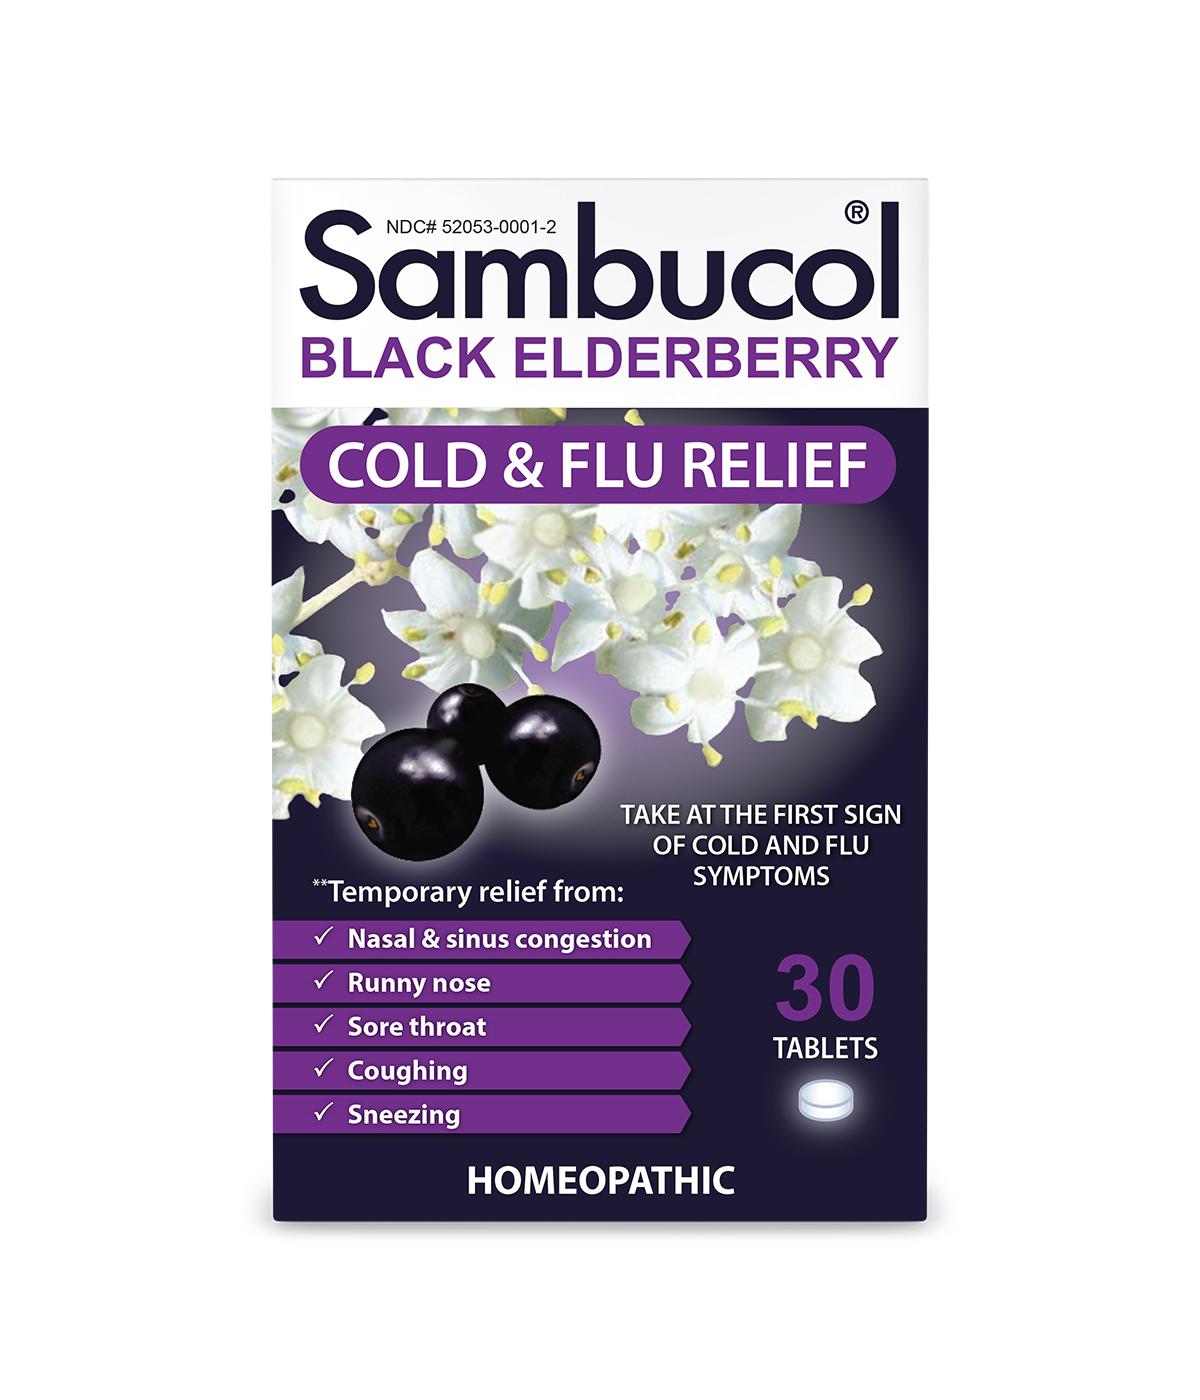 Sambucol Homeopathic Cold & Flu Relief Tablets; image 1 of 9